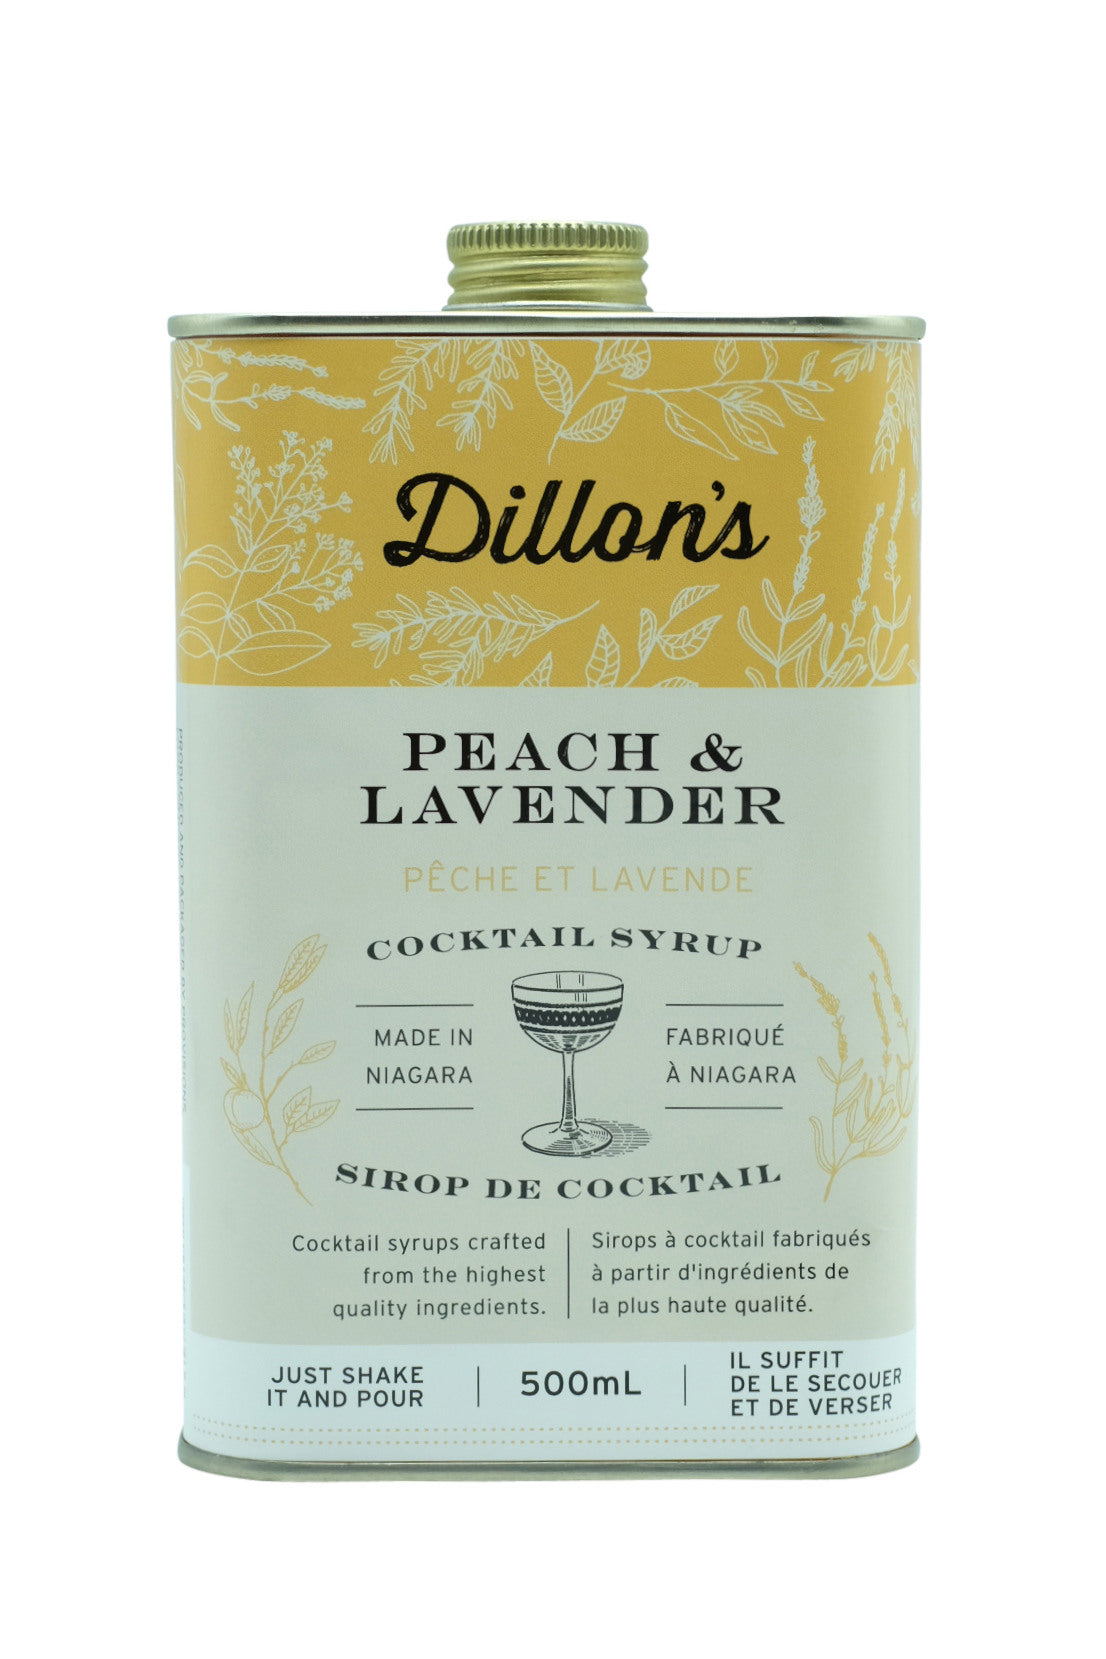 Dillon's Peach & Lavender Cocktail Syrup